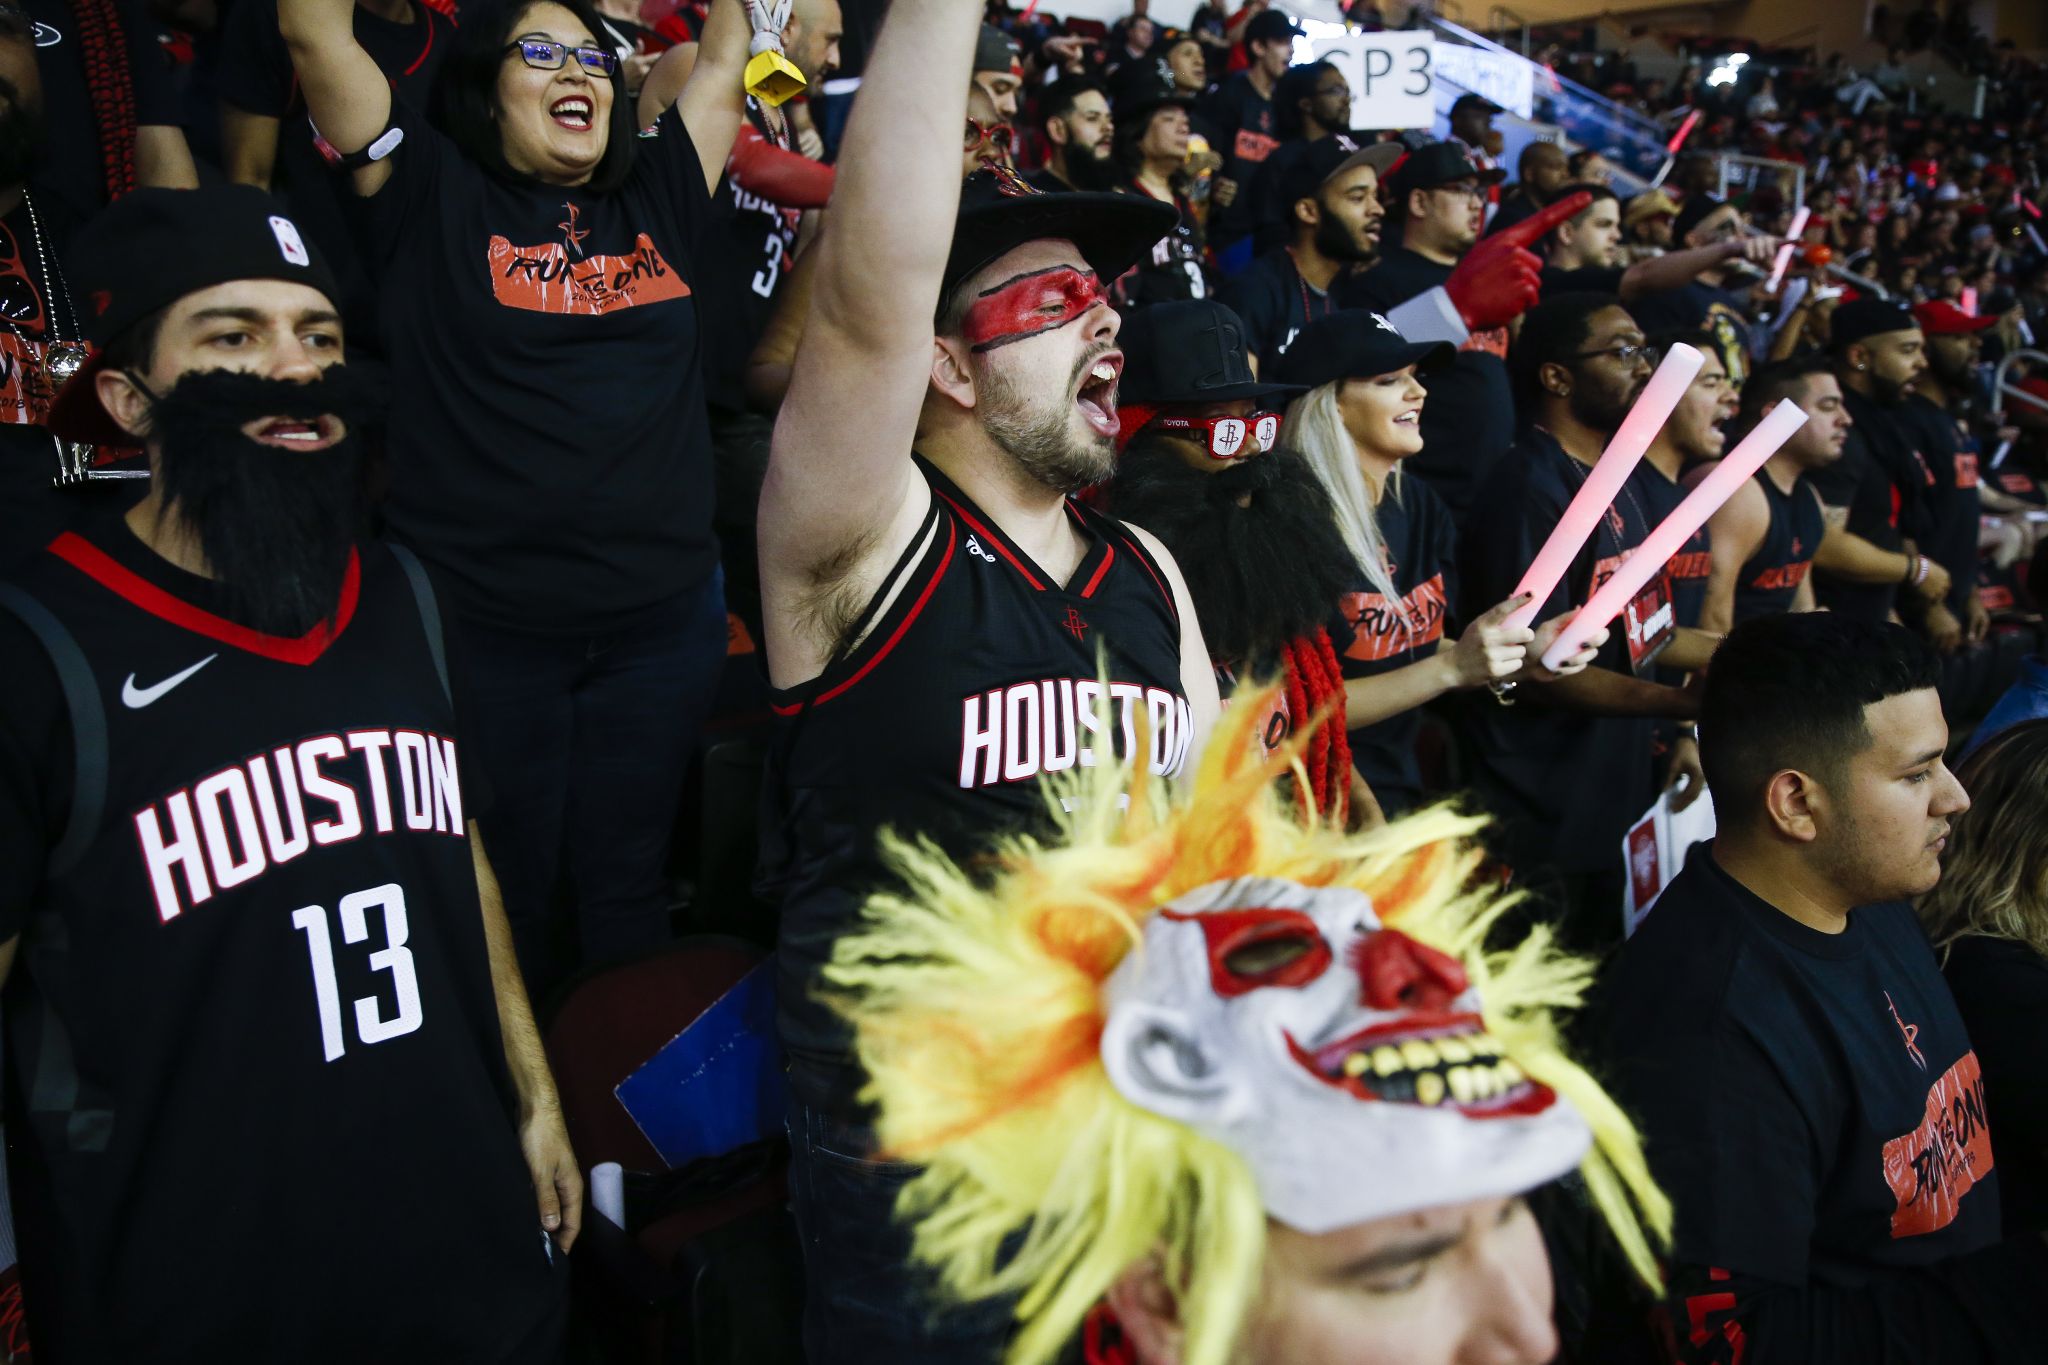 Photos: Fans swarm Toyota Center for Game 1 of Rockets-Timberwolves